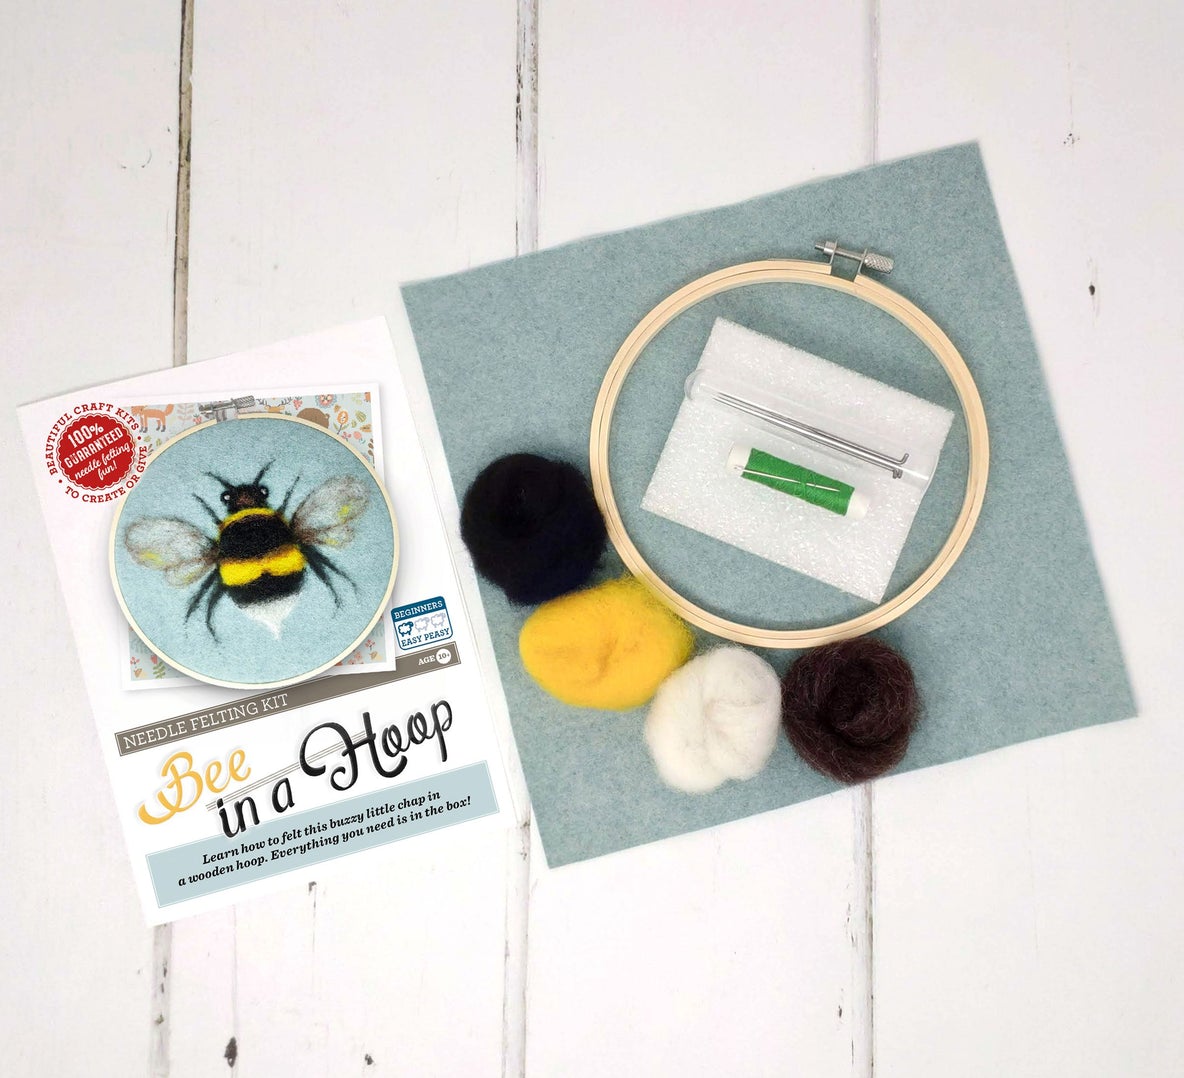 Bee in a hoop needle felt kit image of what's included in kit wool timber hoop needle instructions